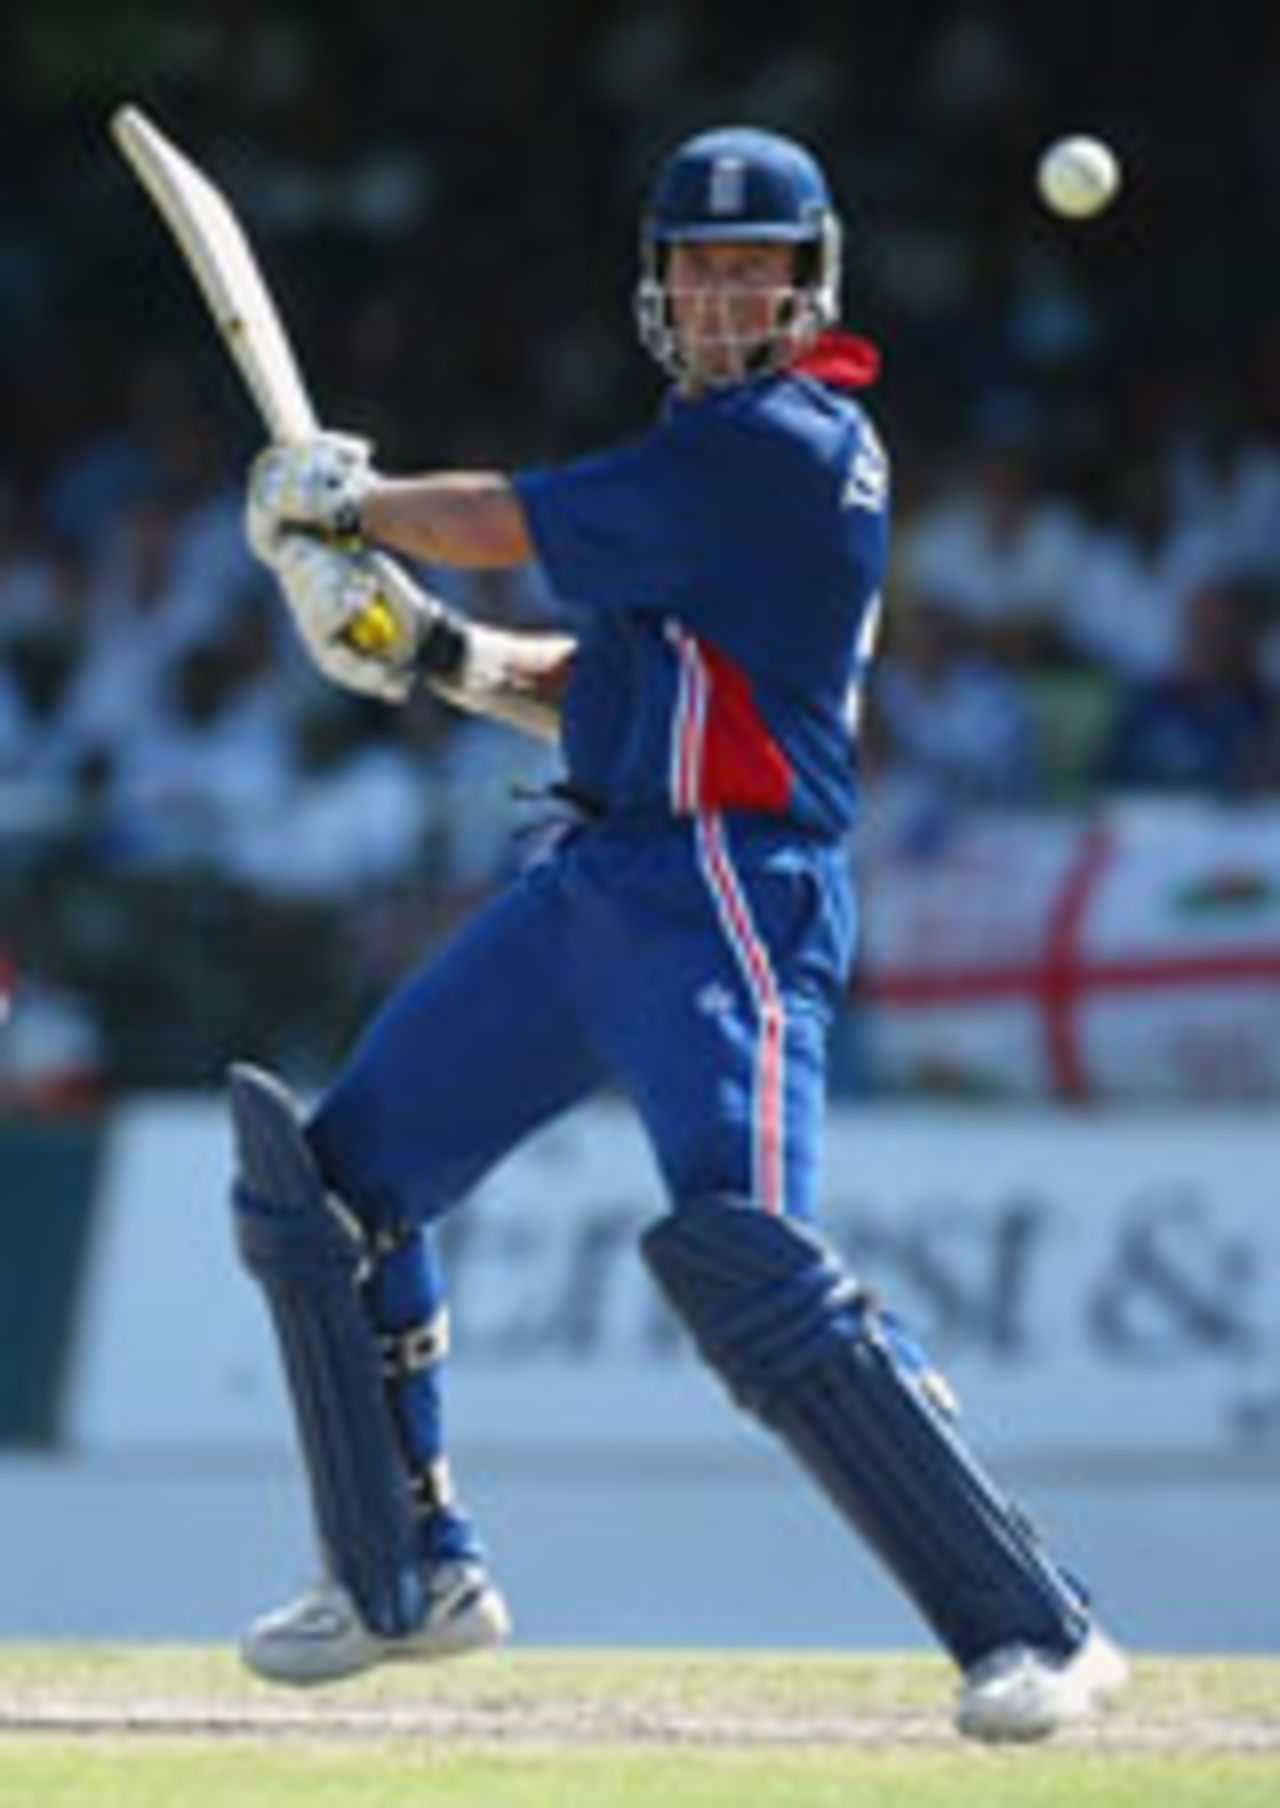 Marcus Trescothick cuts in his whirlwind start, West Indies v England, 7th ODI, May 5, 2004